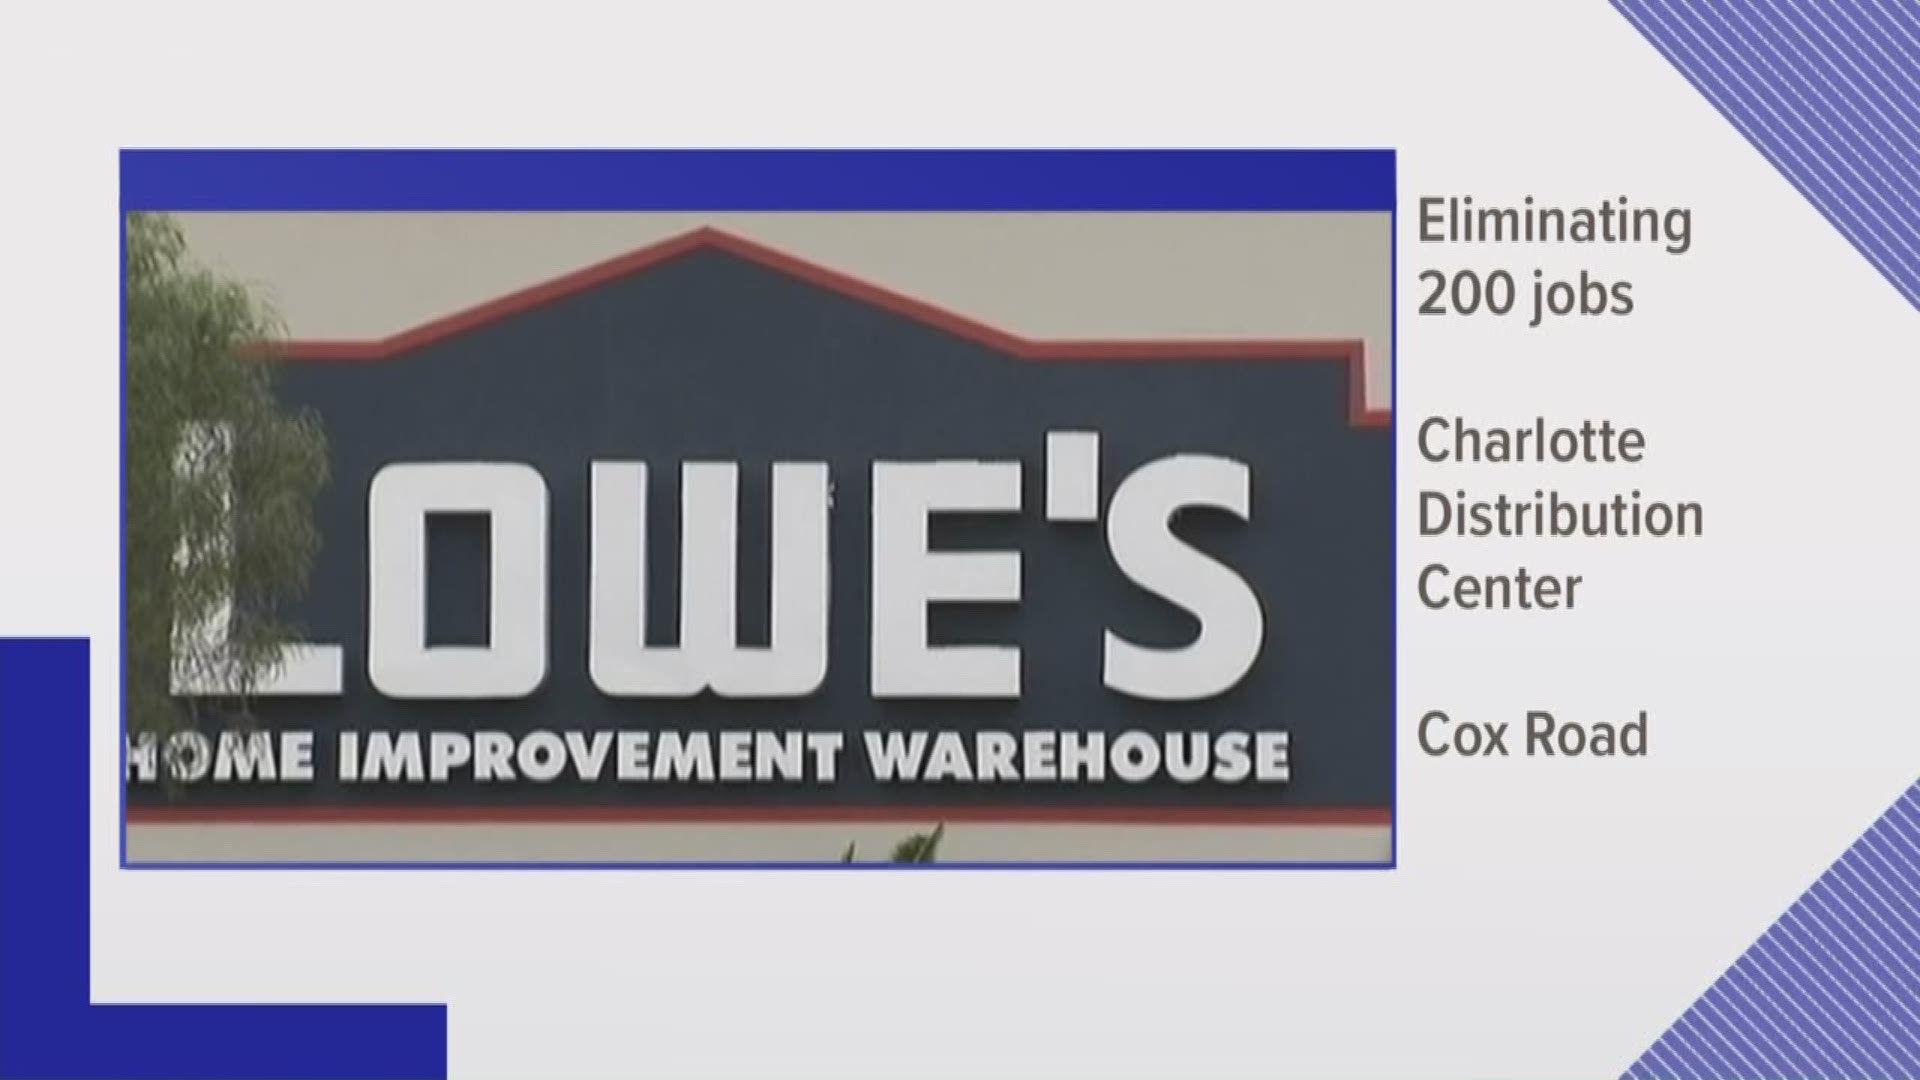 About 200 jobs will be eliminated at the distribution center in Charlotte due to a transition to a third-party vendor.